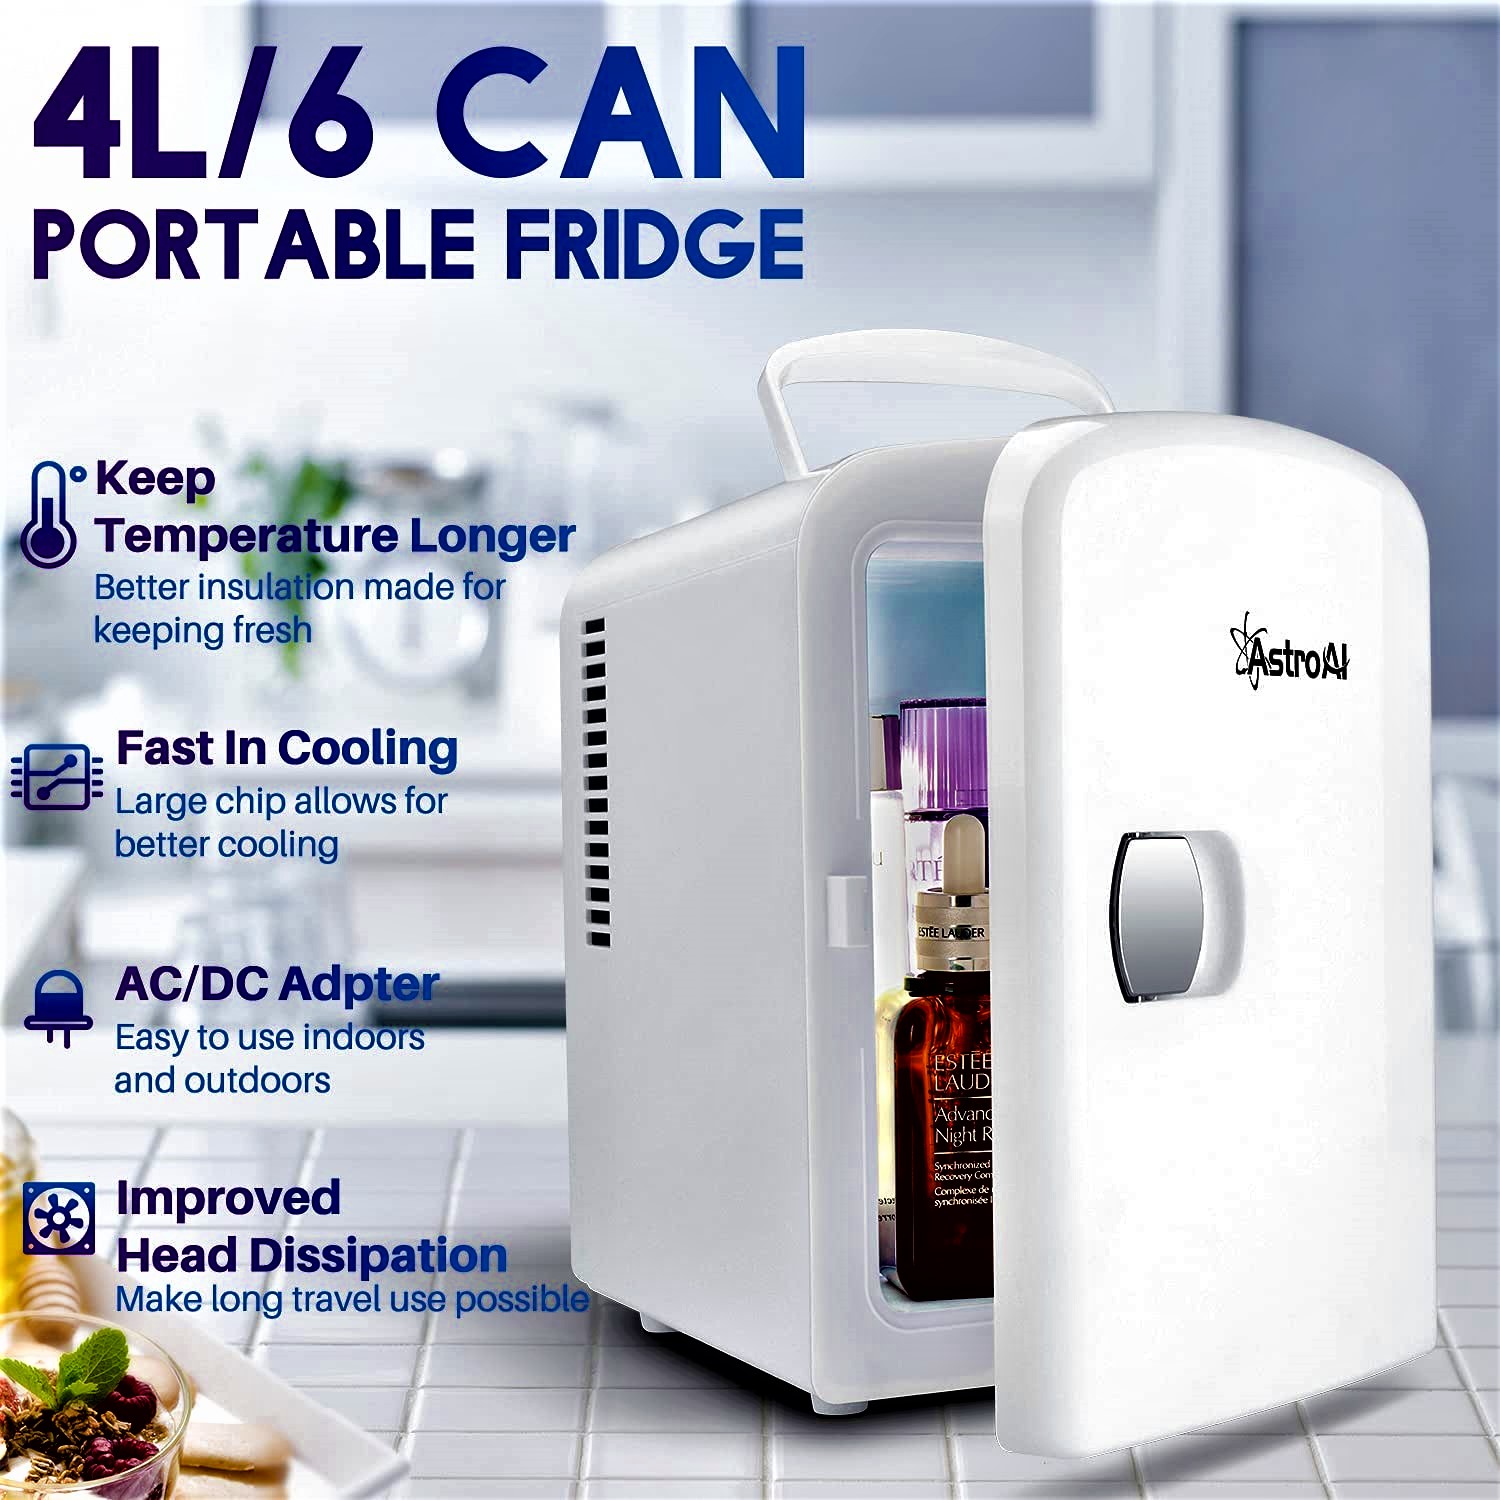 10 Best Portable Mini Fridge Cooler 2022 Under $100 Reviews All In One Cooling Gear Lab: Any Refrigerators Air Conditioners Freezers Ice Makers Coolers Fans Reviewed And Compared.